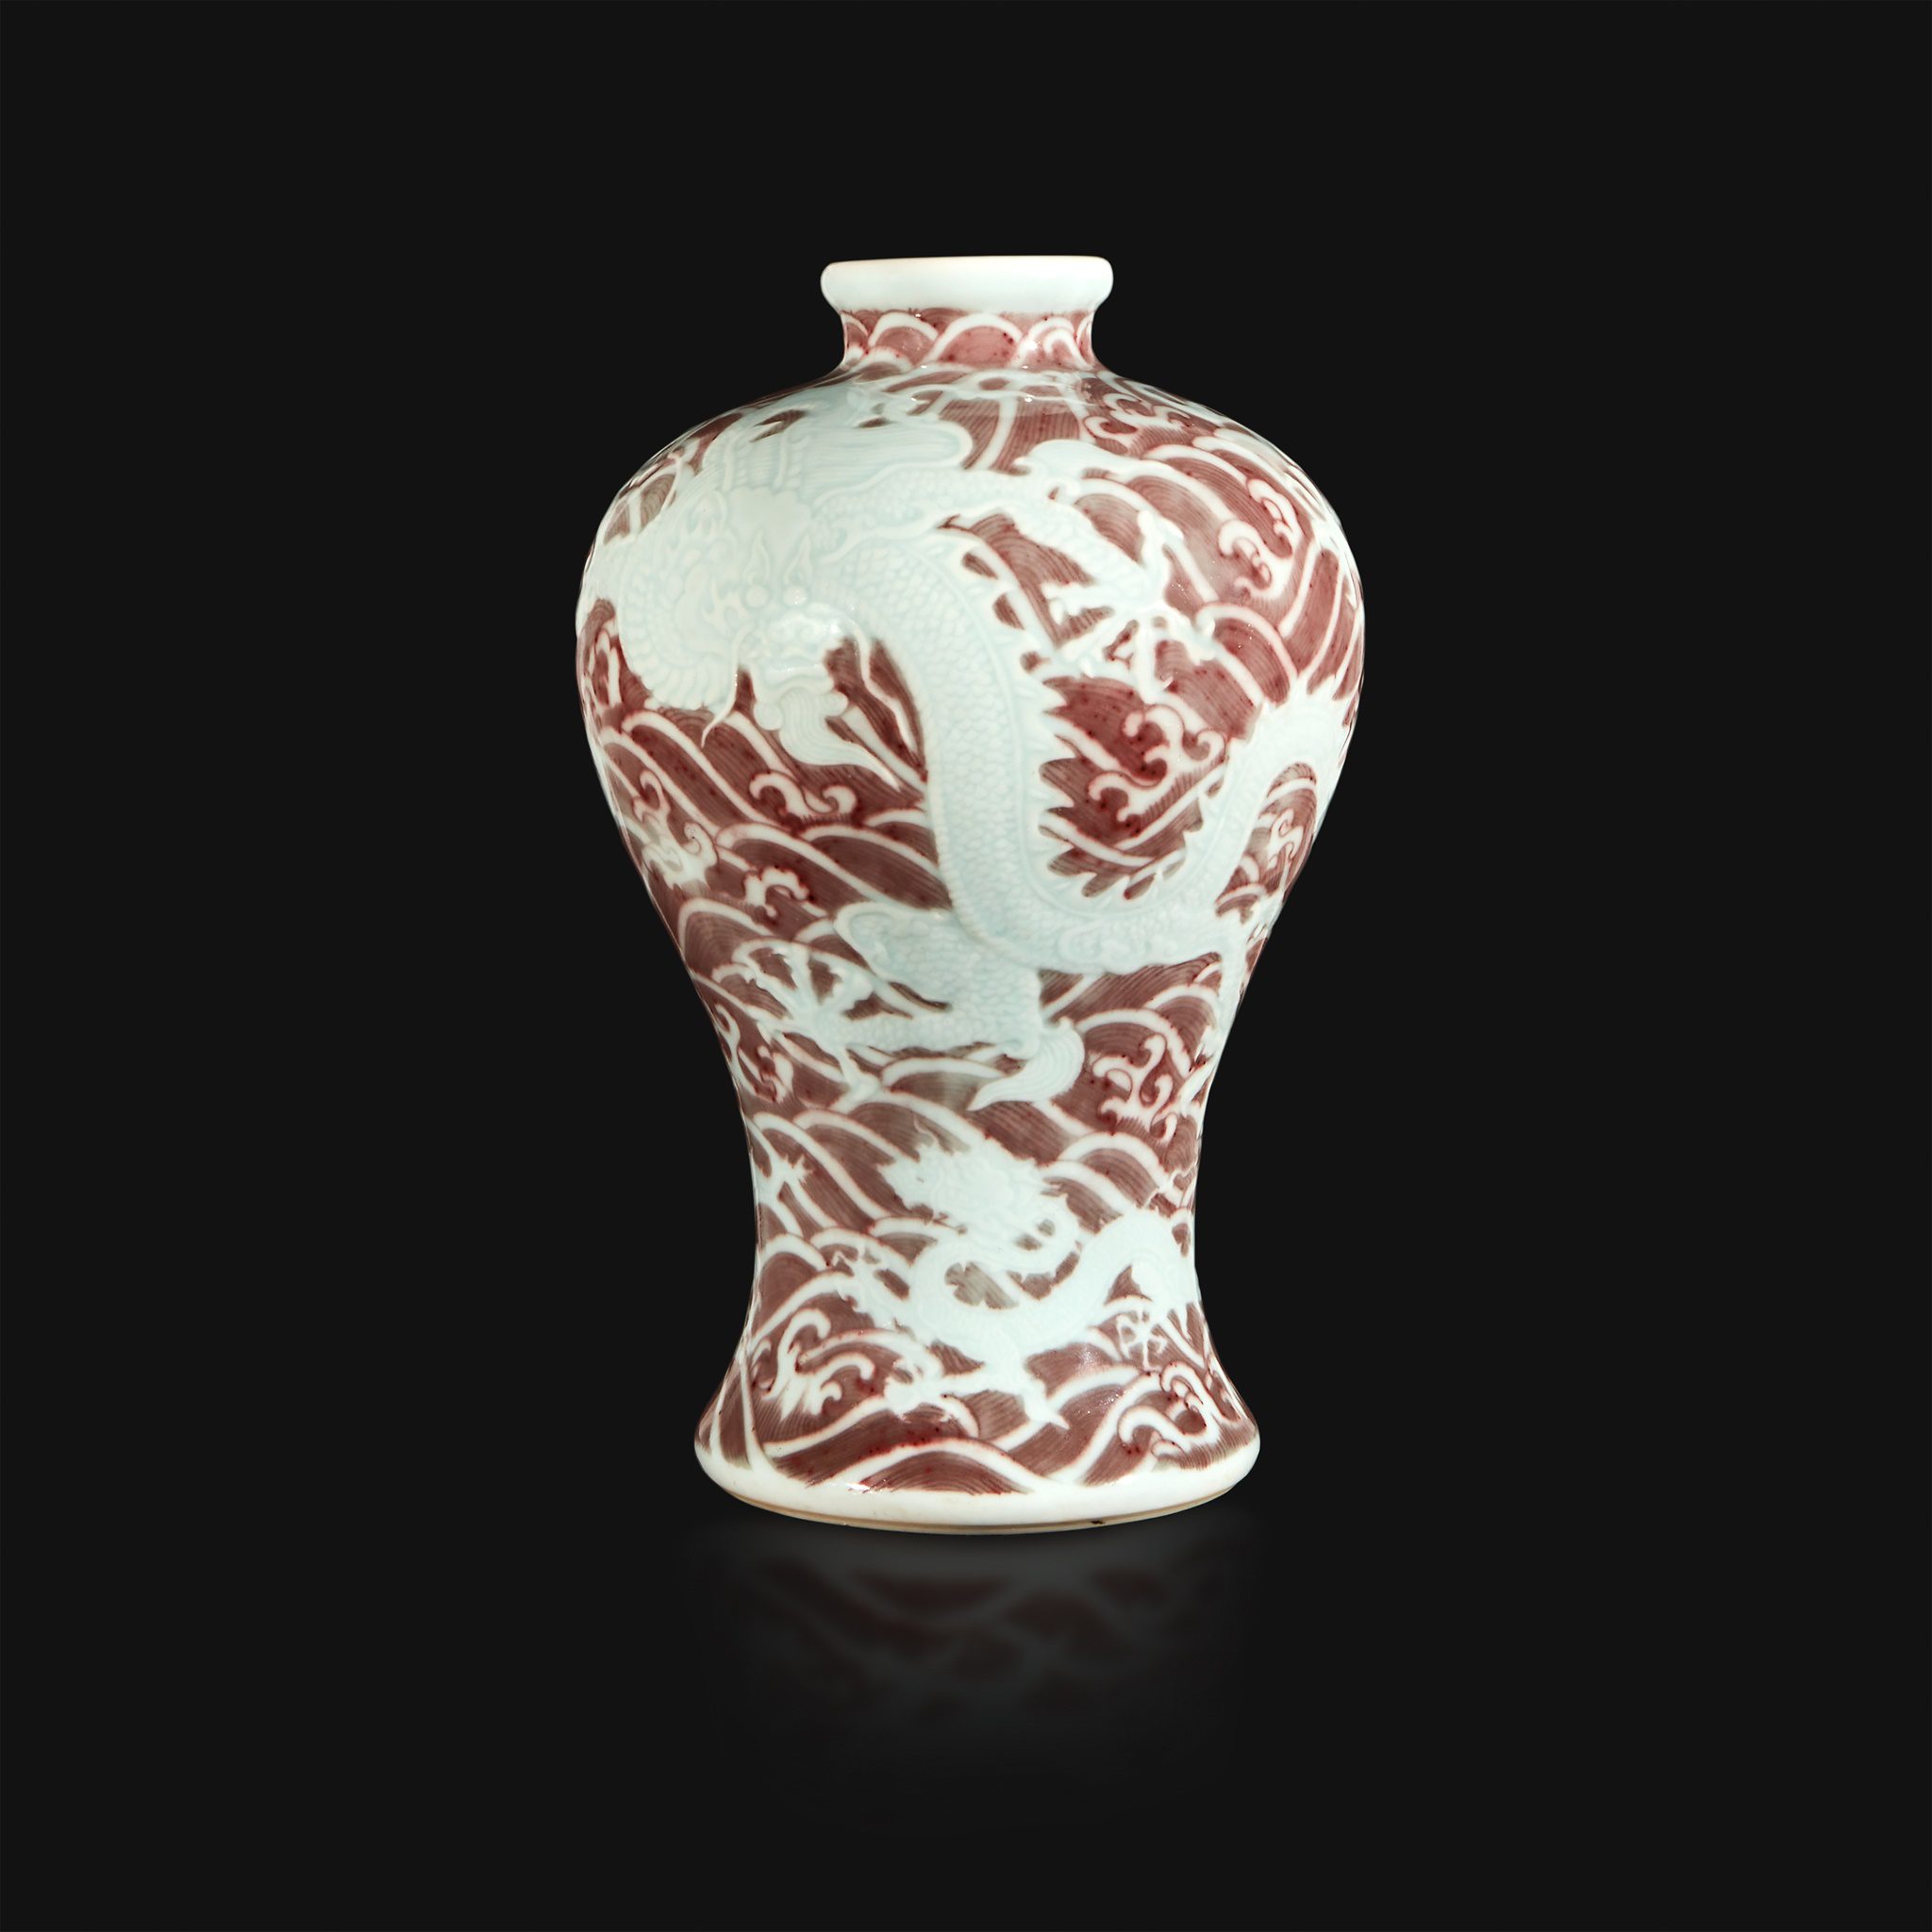 Chinese carved and underglaze red “Dragons and Waves” vase (Lot 12, $150,000-250,000) Freeman's Auction